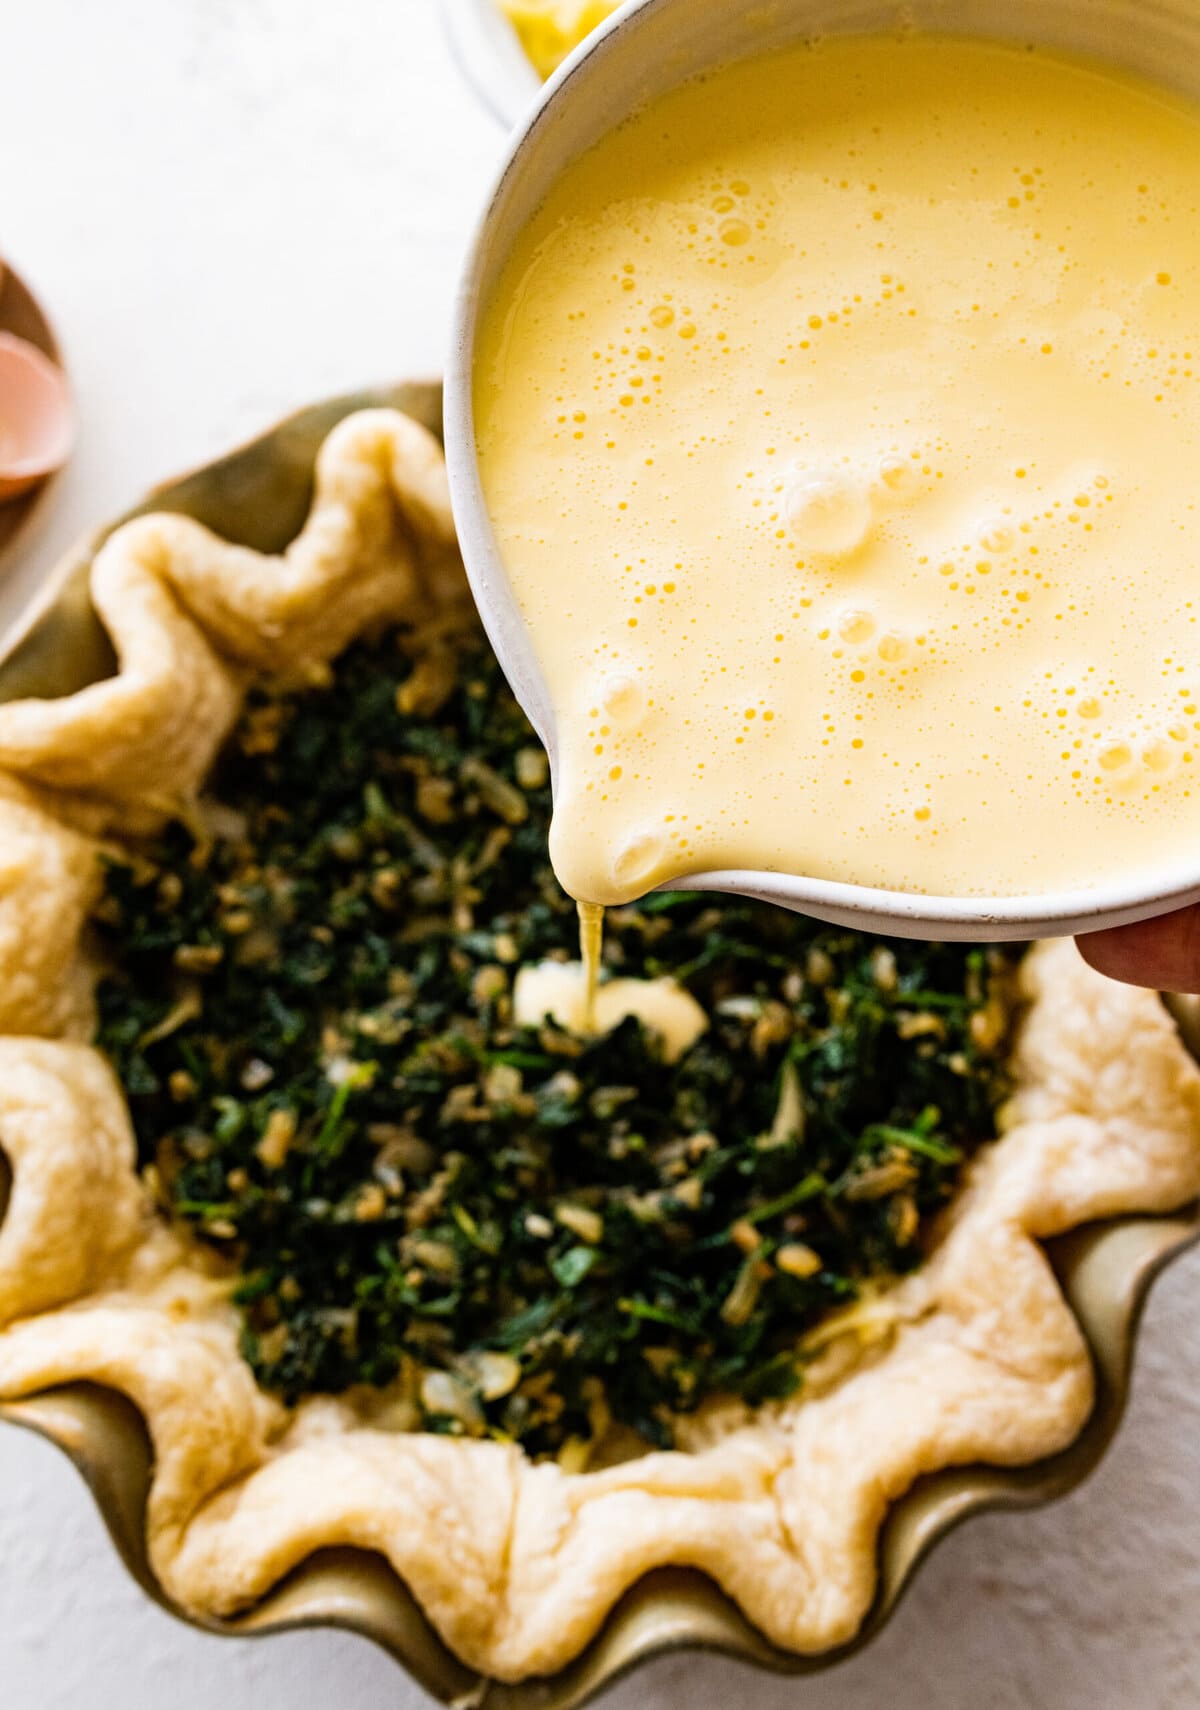 How to make spinach quiche step-by-step: pour egg custard on top of spinach in pie dish.